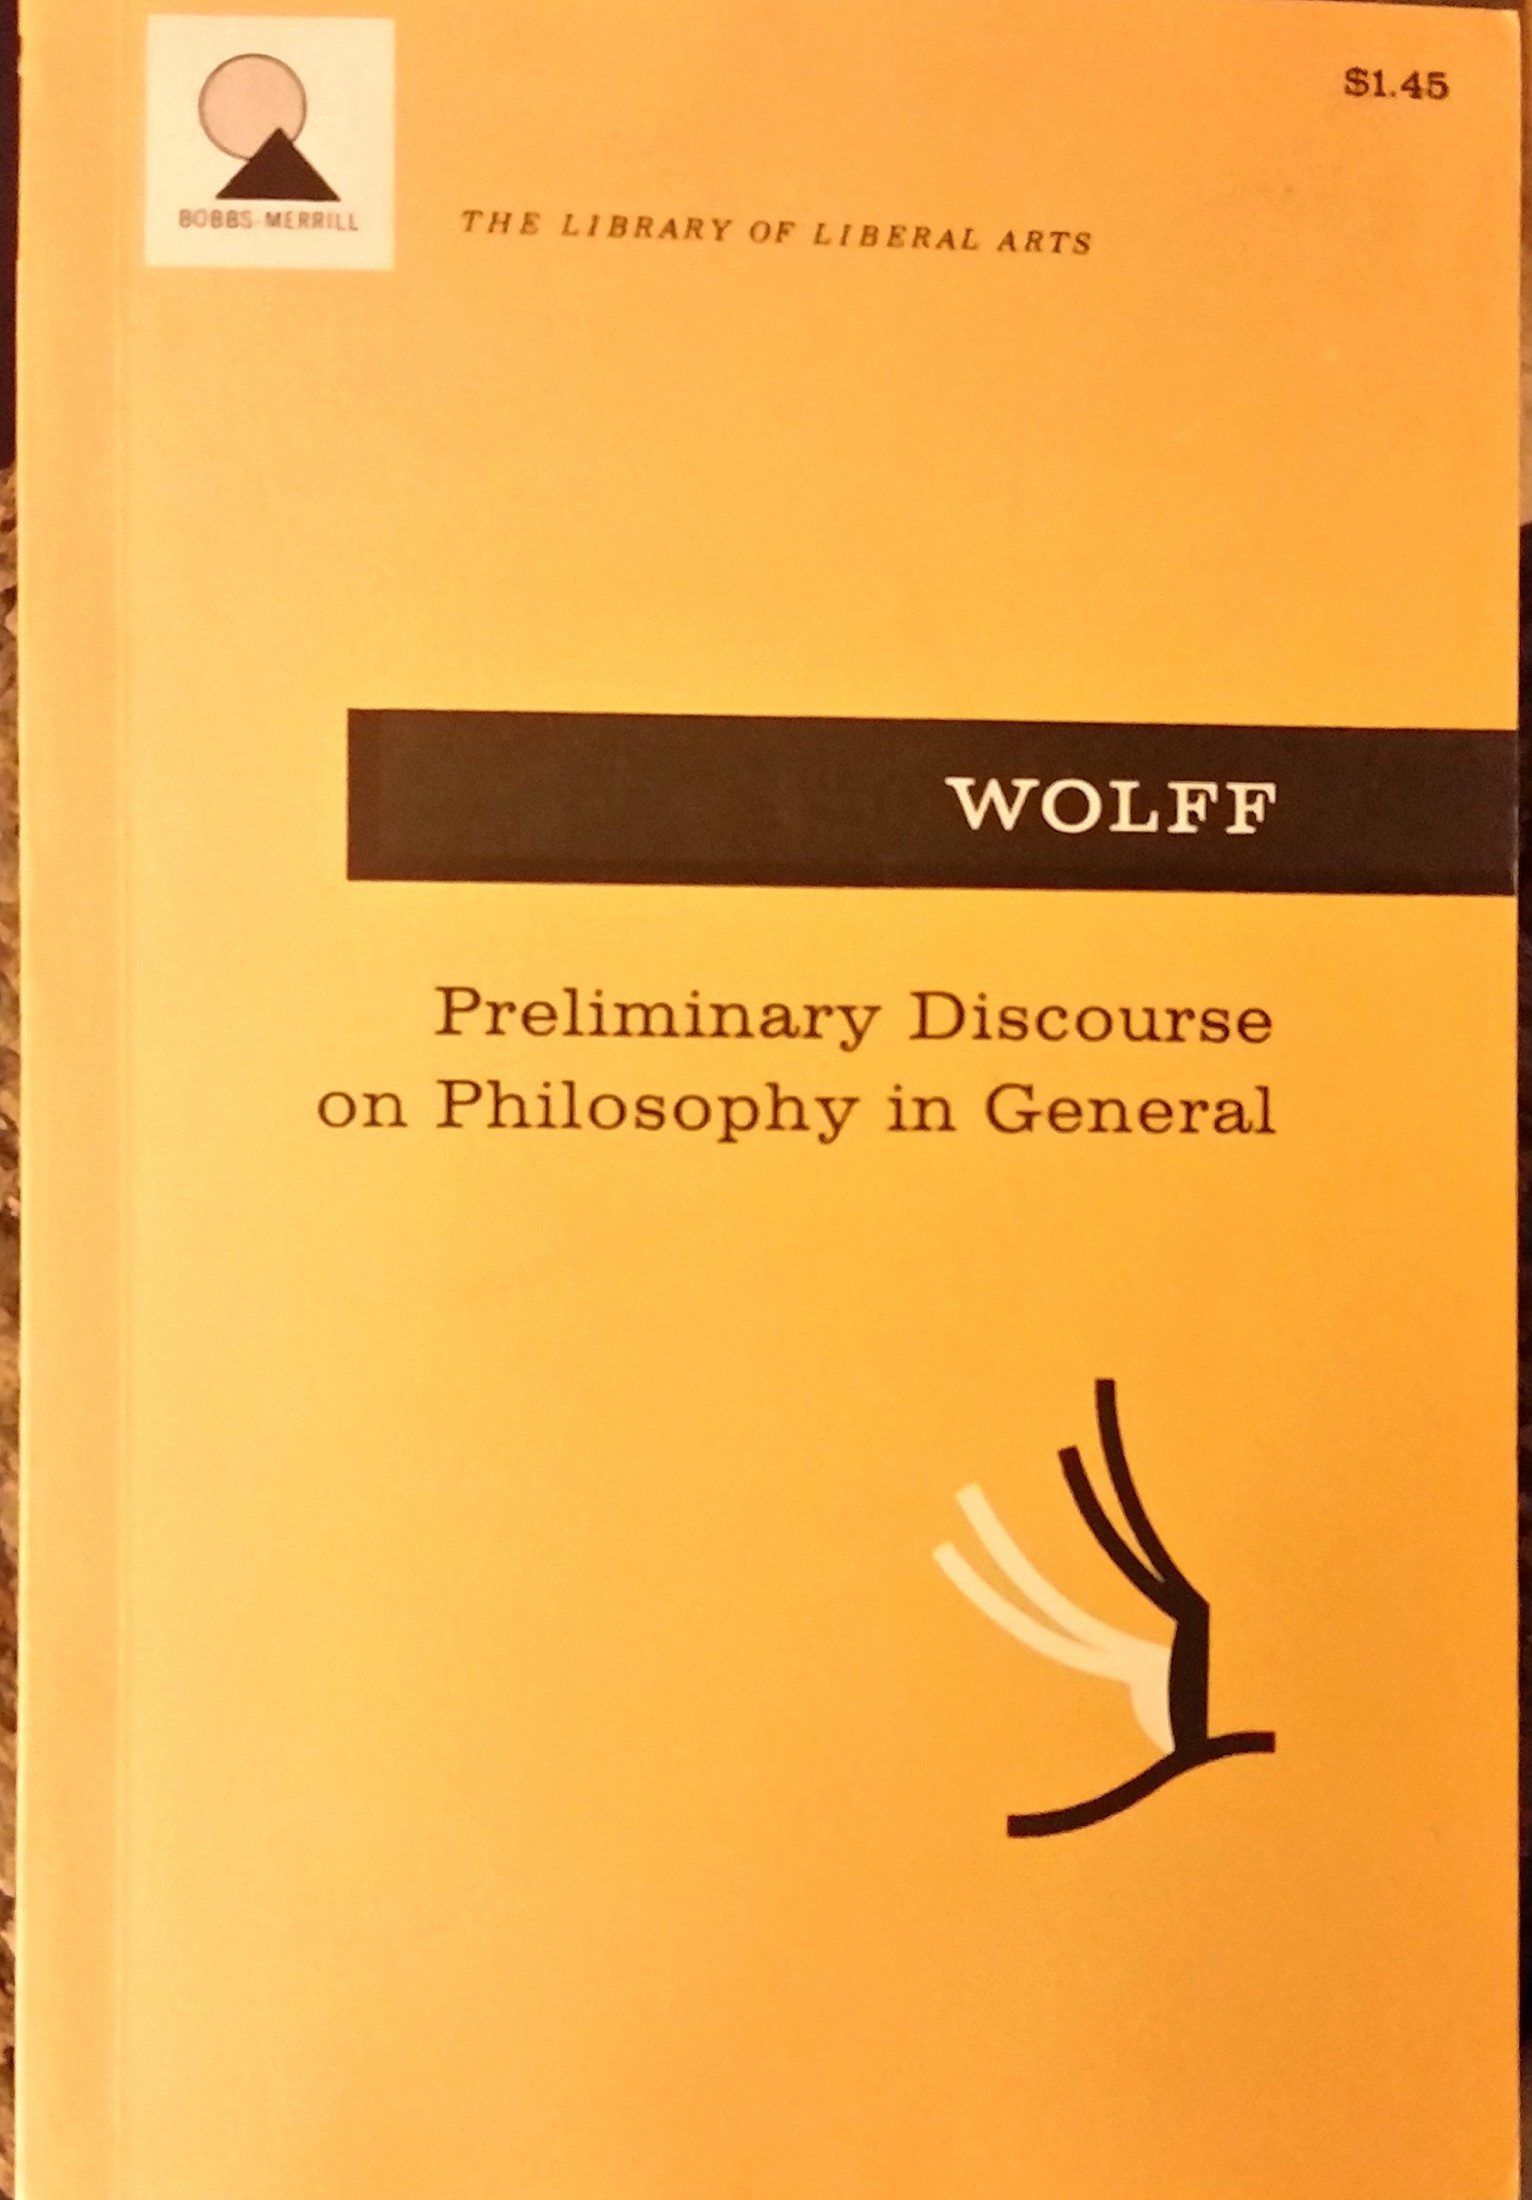 Preliminary Discourse on Philosophy in General